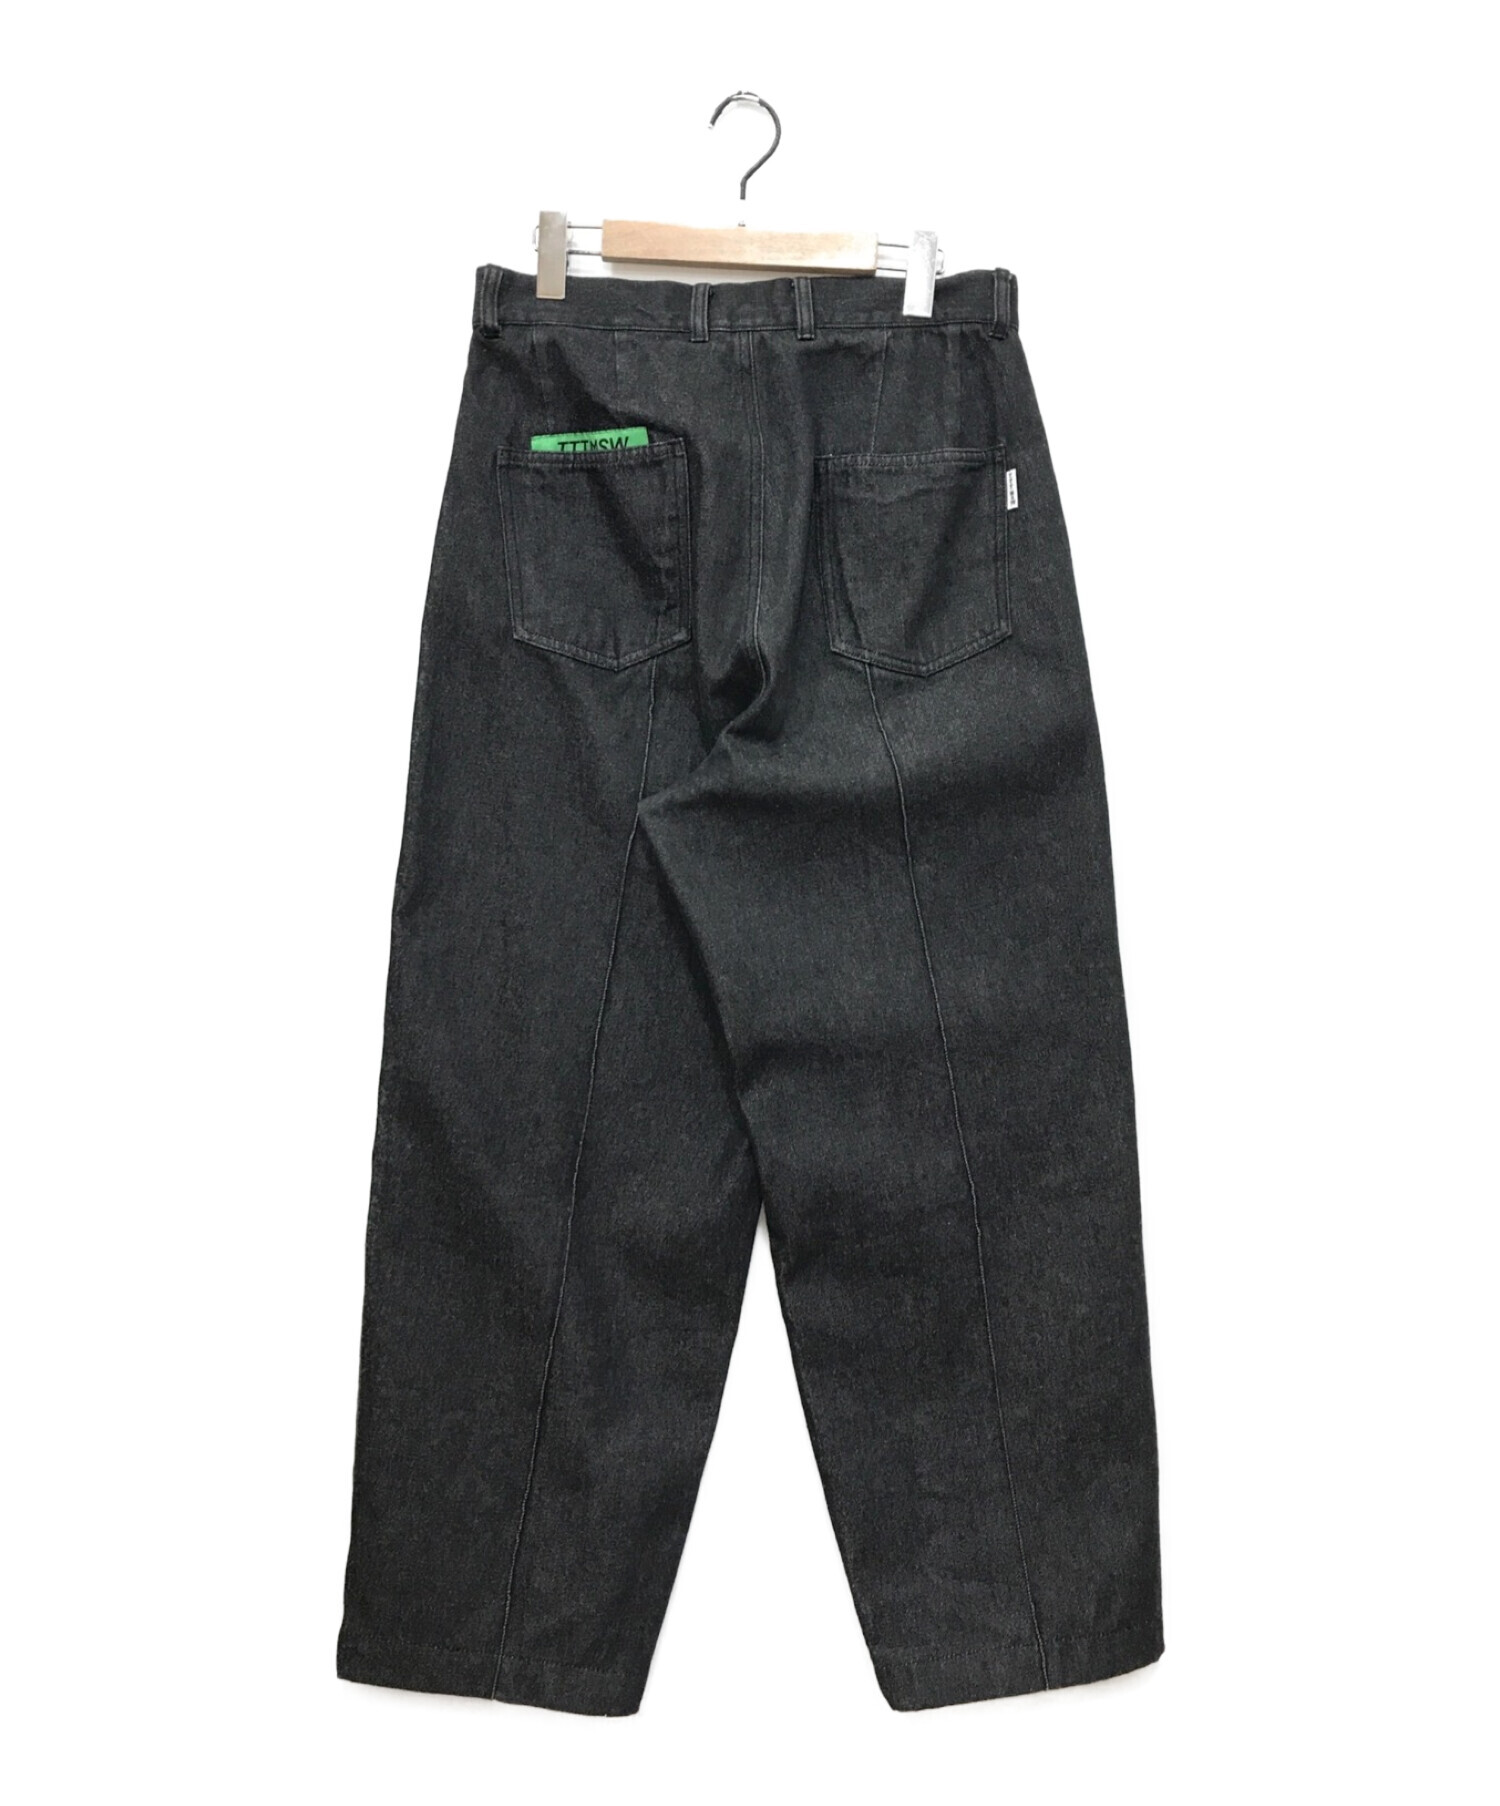 TTT MSW 22AW New Standard Wide Pants パンツ - ワークパンツ/カーゴ 